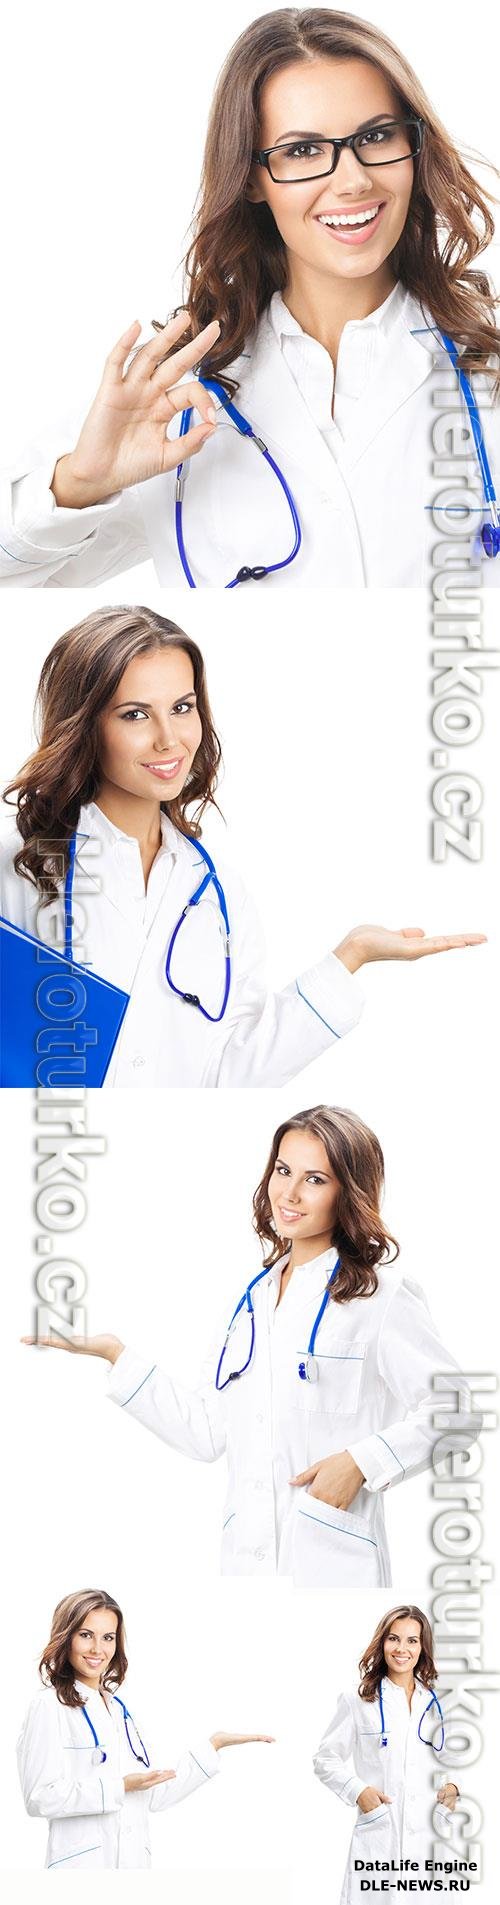 Woman doctor in different poses